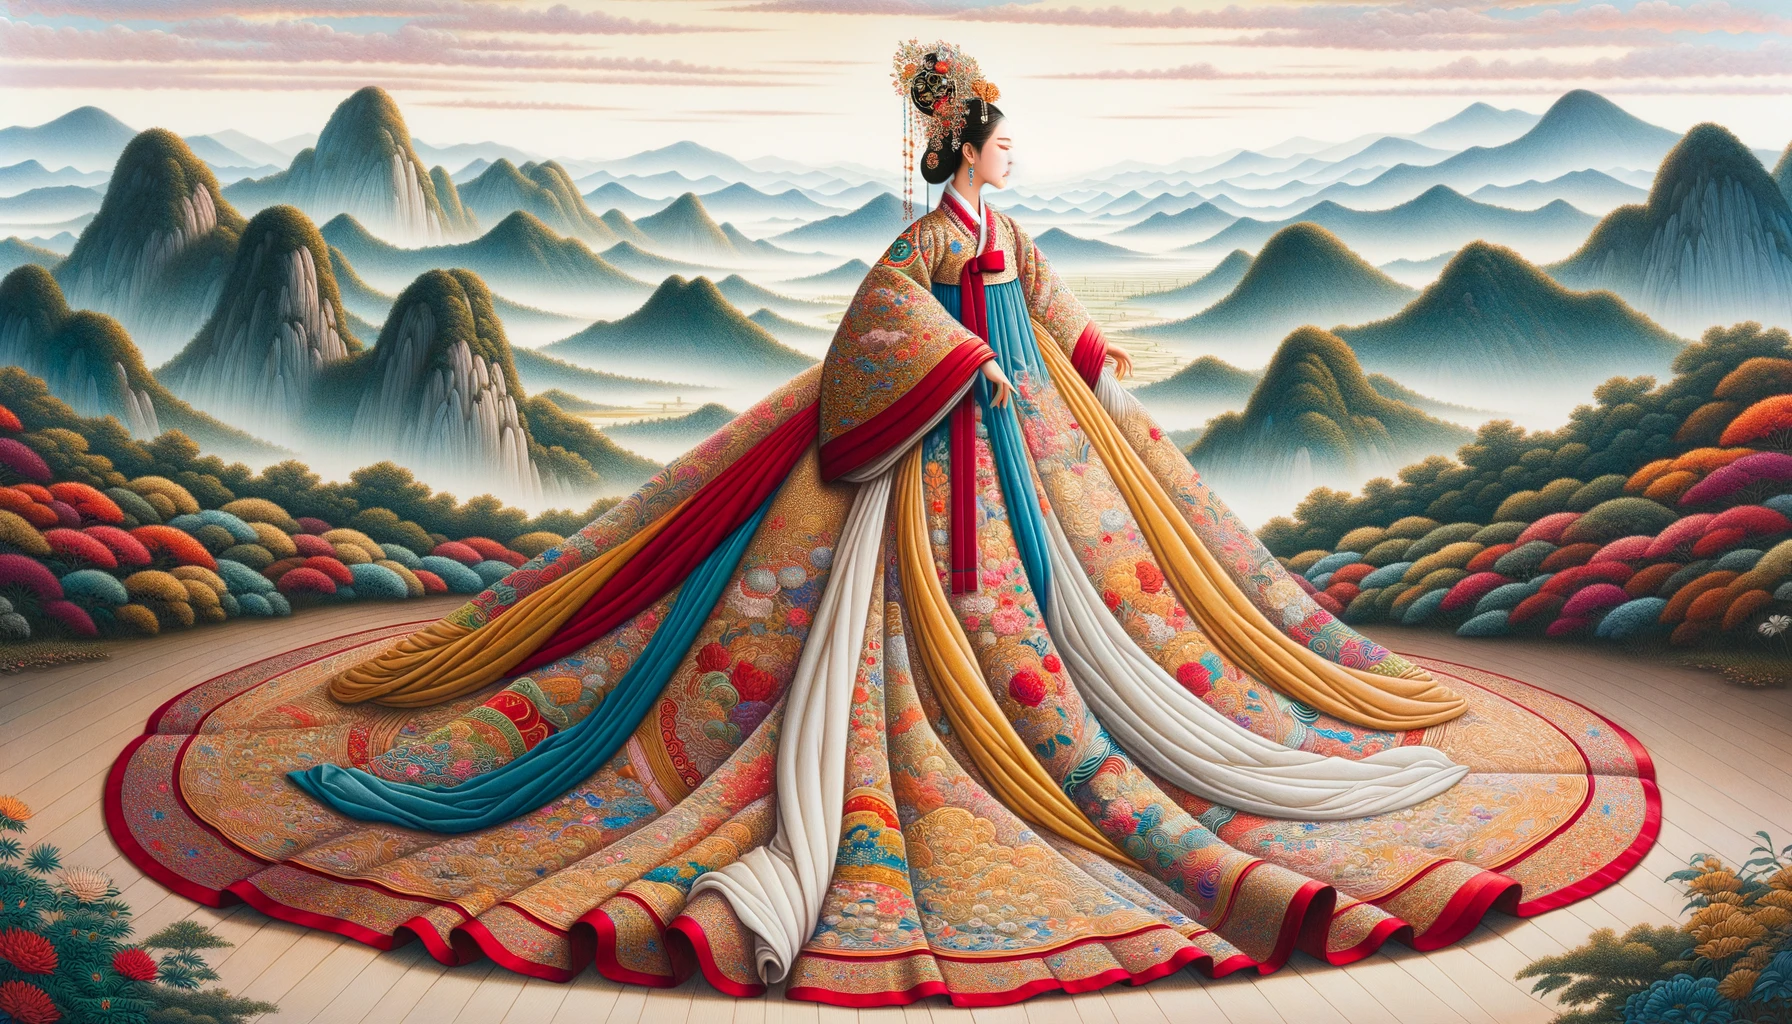 An illustration depicting a bride from Imperial Korea wearing a brightly co